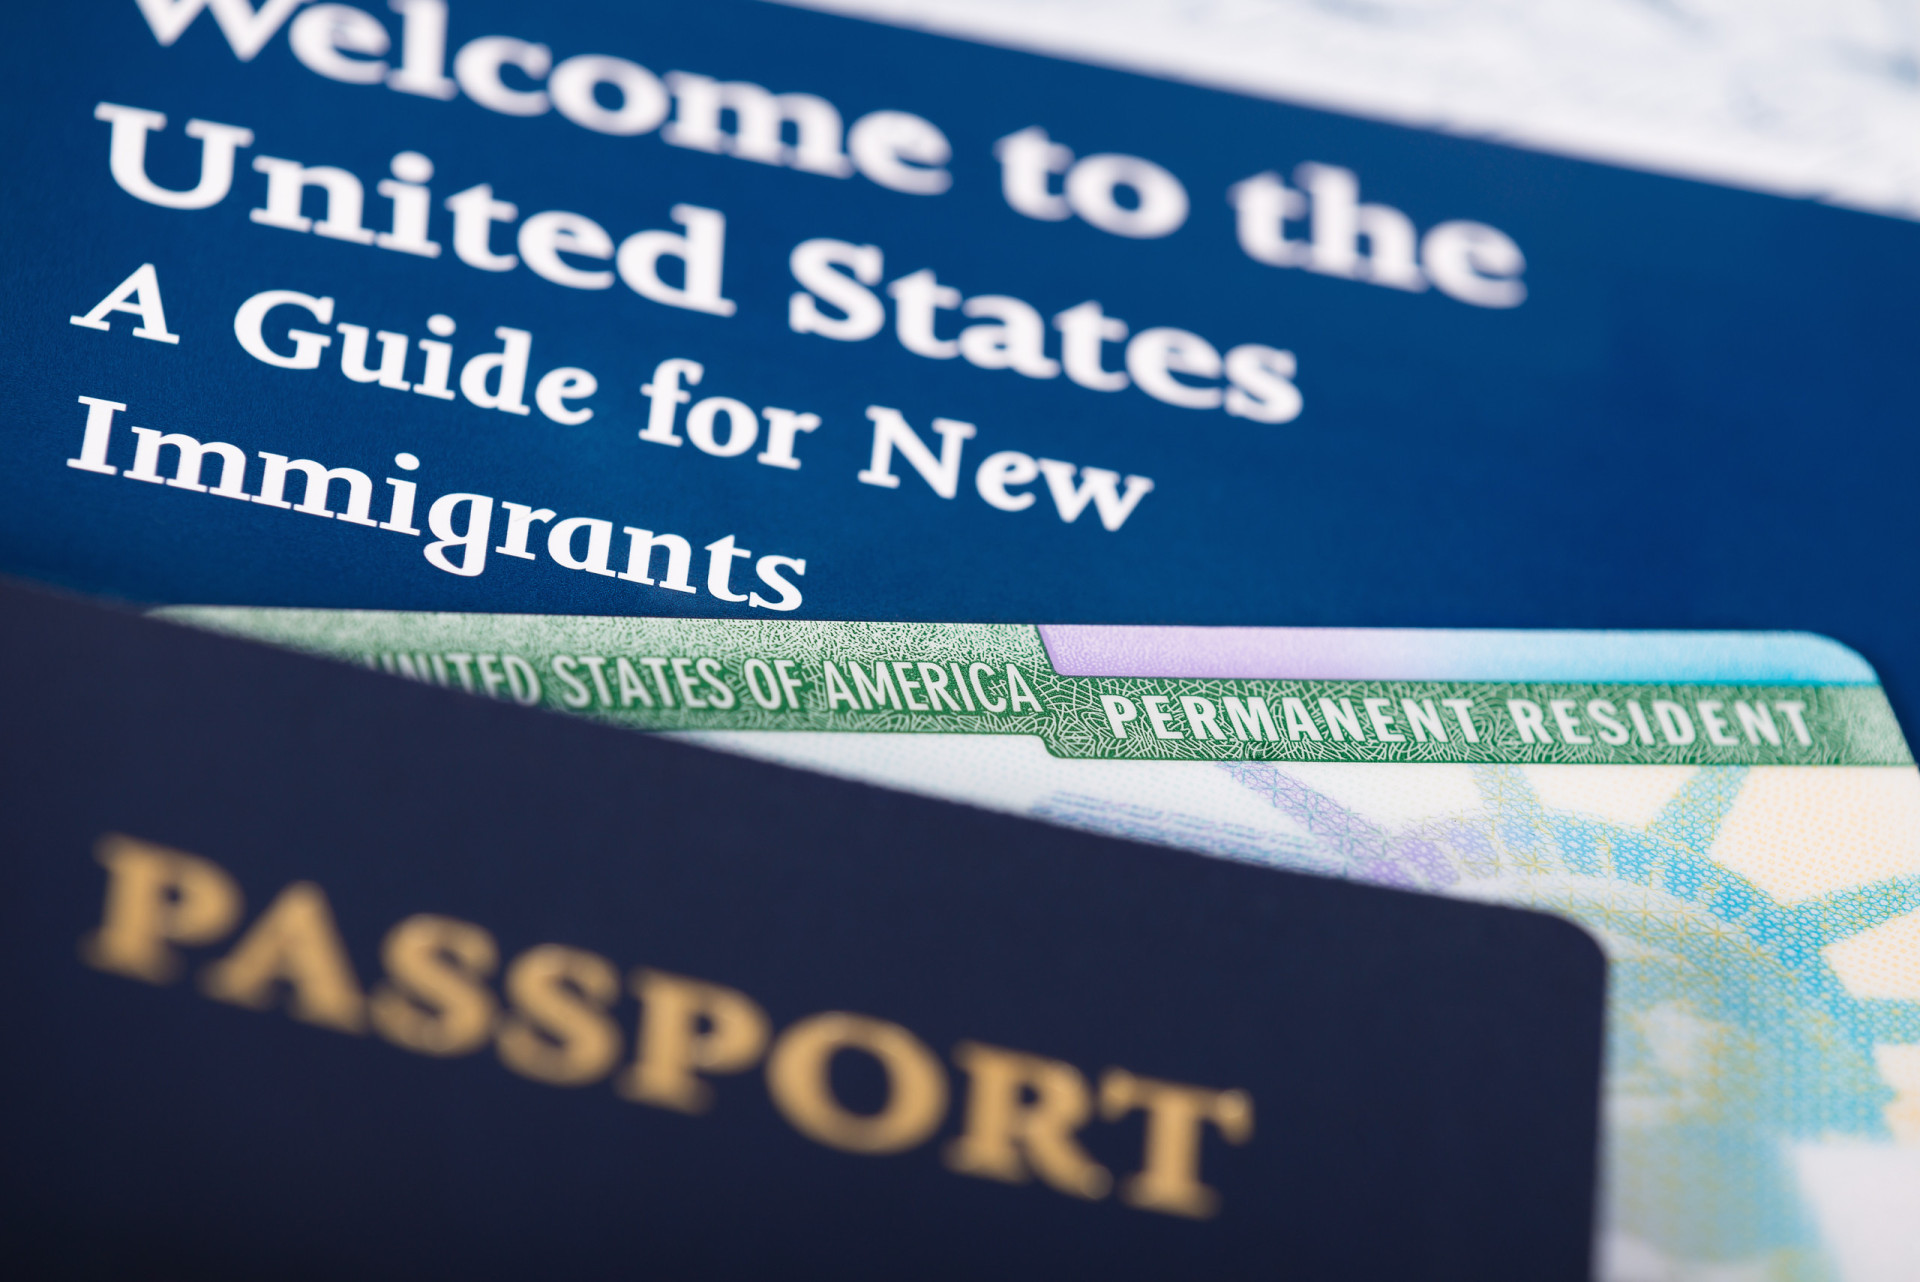 <p>As a successful applicant, the USCIS will, in the first instance, mail you a welcome notice. You'll then be sent your green card.</p><p><a href="https://www.msn.com/en-us/community/channel/vid-7xx8mnucu55yw63we9va2gwr7uihbxwc68fxqp25x6tg4ftibpra?cvid=94631541bc0f4f89bfd59158d696ad7e">Follow us and access great exclusive content every day</a></p>